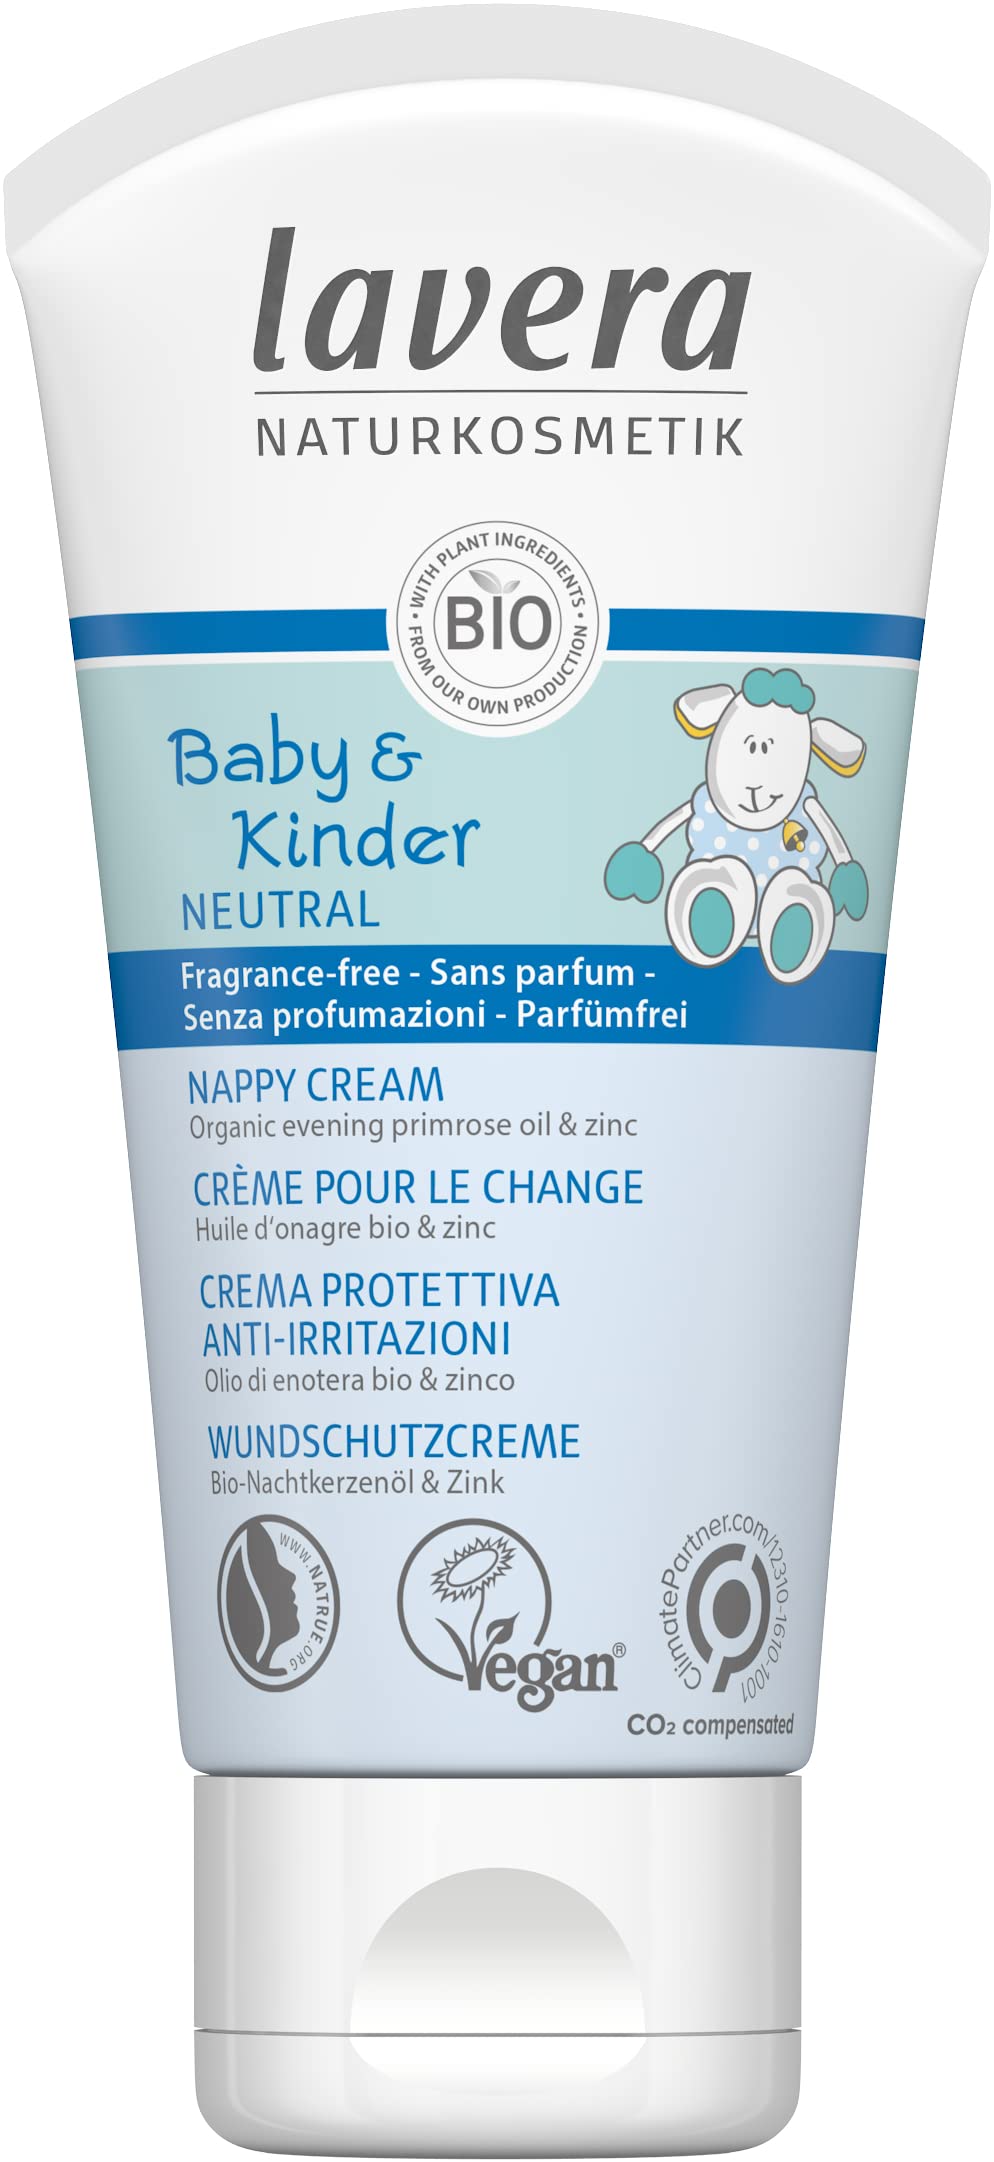 lavera Baby & Kids Neutral Nappy Cream - Natural Cosmetics - vegan - organic evening primrose oil - zinc - protects, moisturises and soothes red and irritated baby skin - 50 ml - NewNest Australia